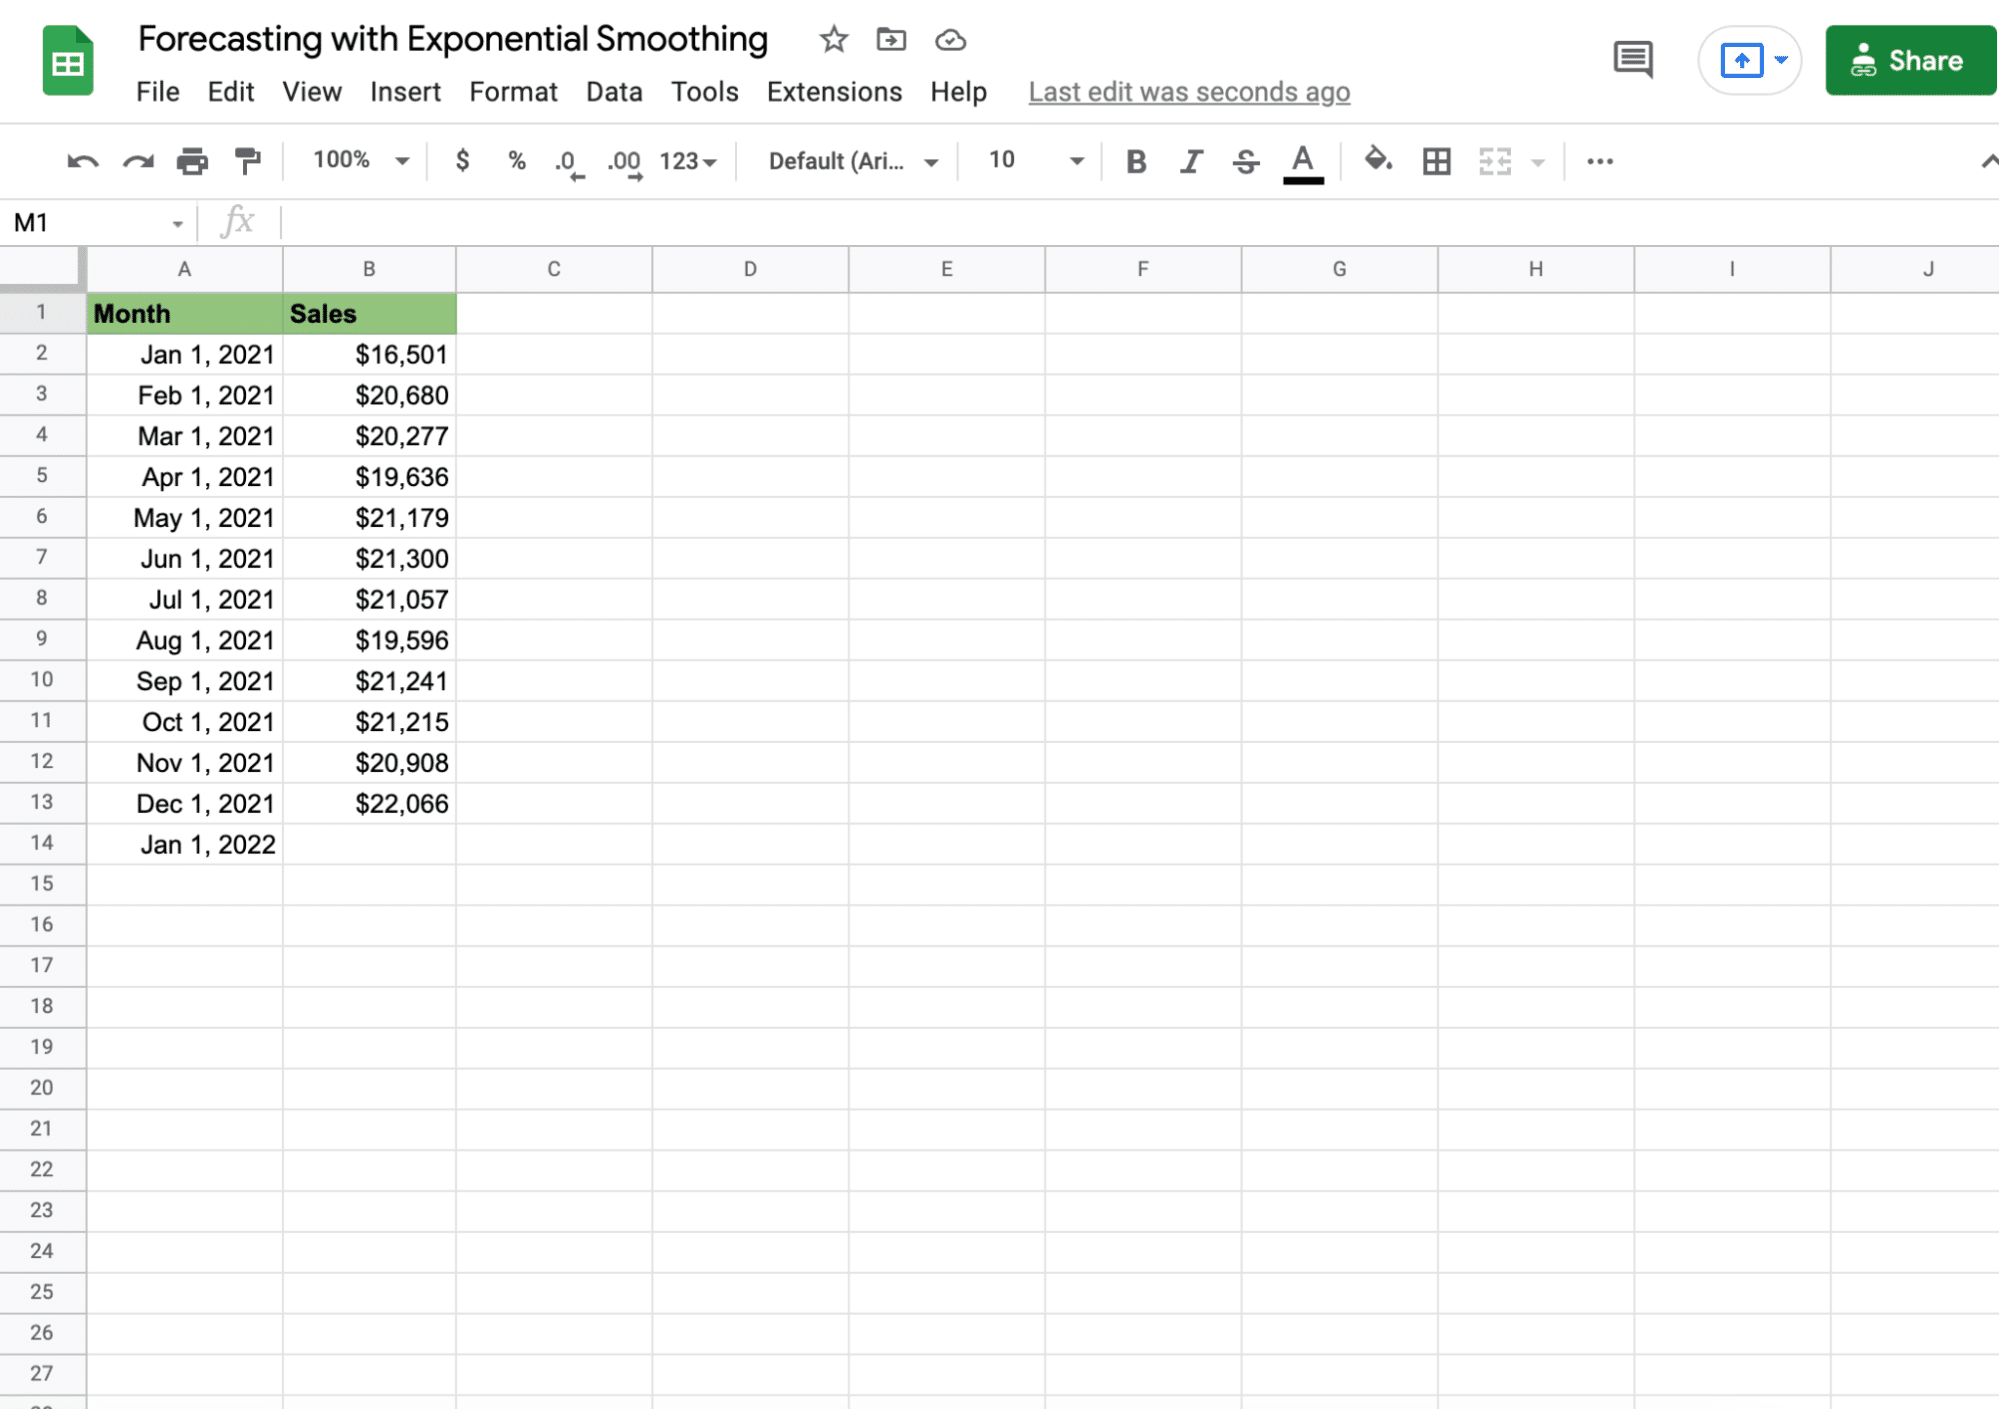 google-sheets-forecasting-exponential-smoothing